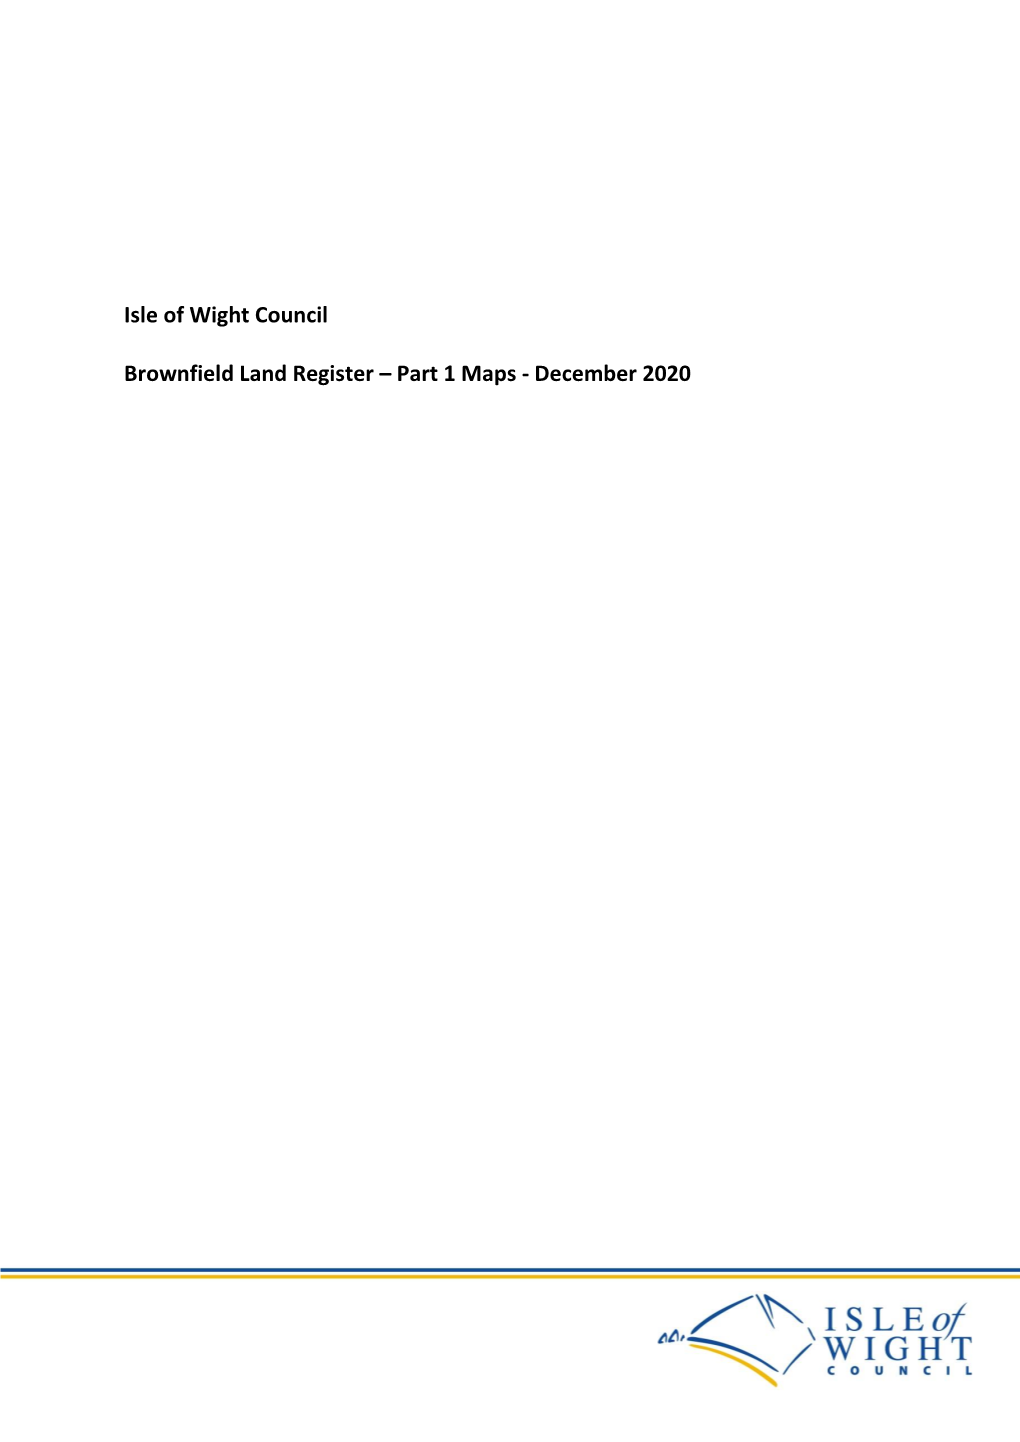 Isle of Wight Council Brownfield Land Register – Part 1 Maps